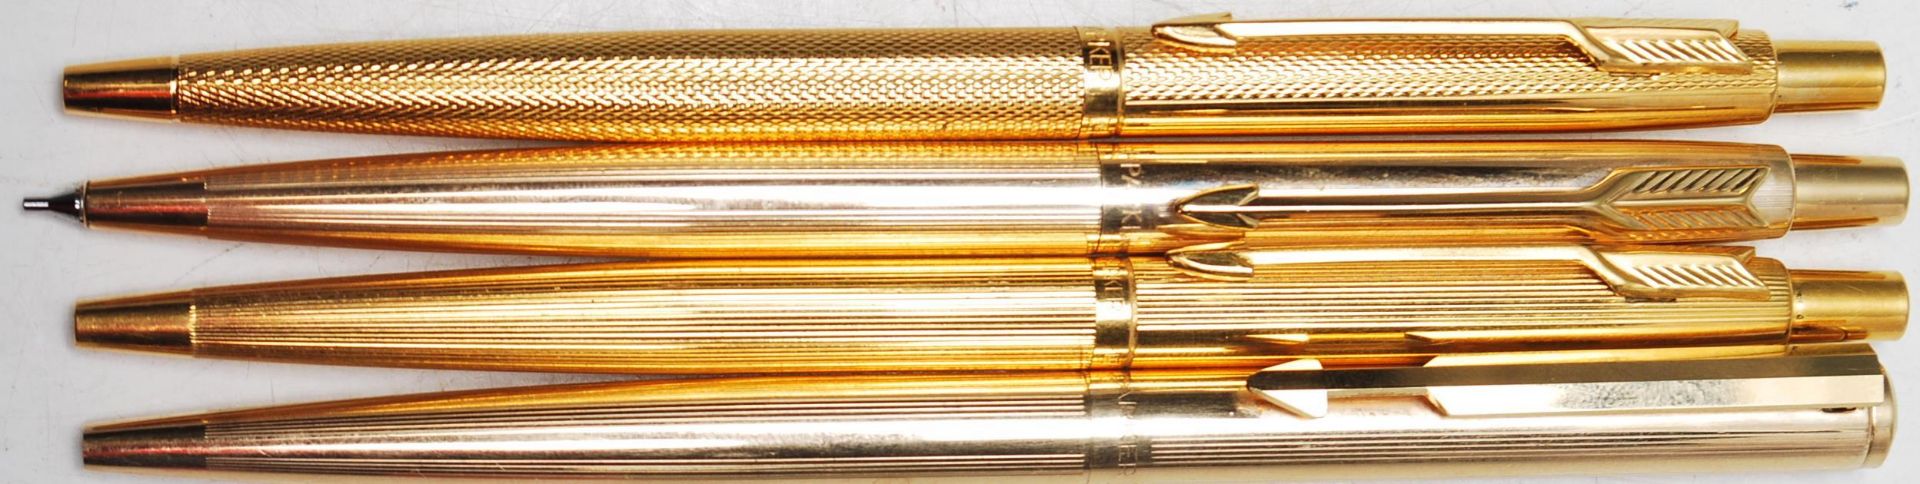 COLLECTION OF FOUR VINTAGE GOLD PLATED PARKER WRITING PENS